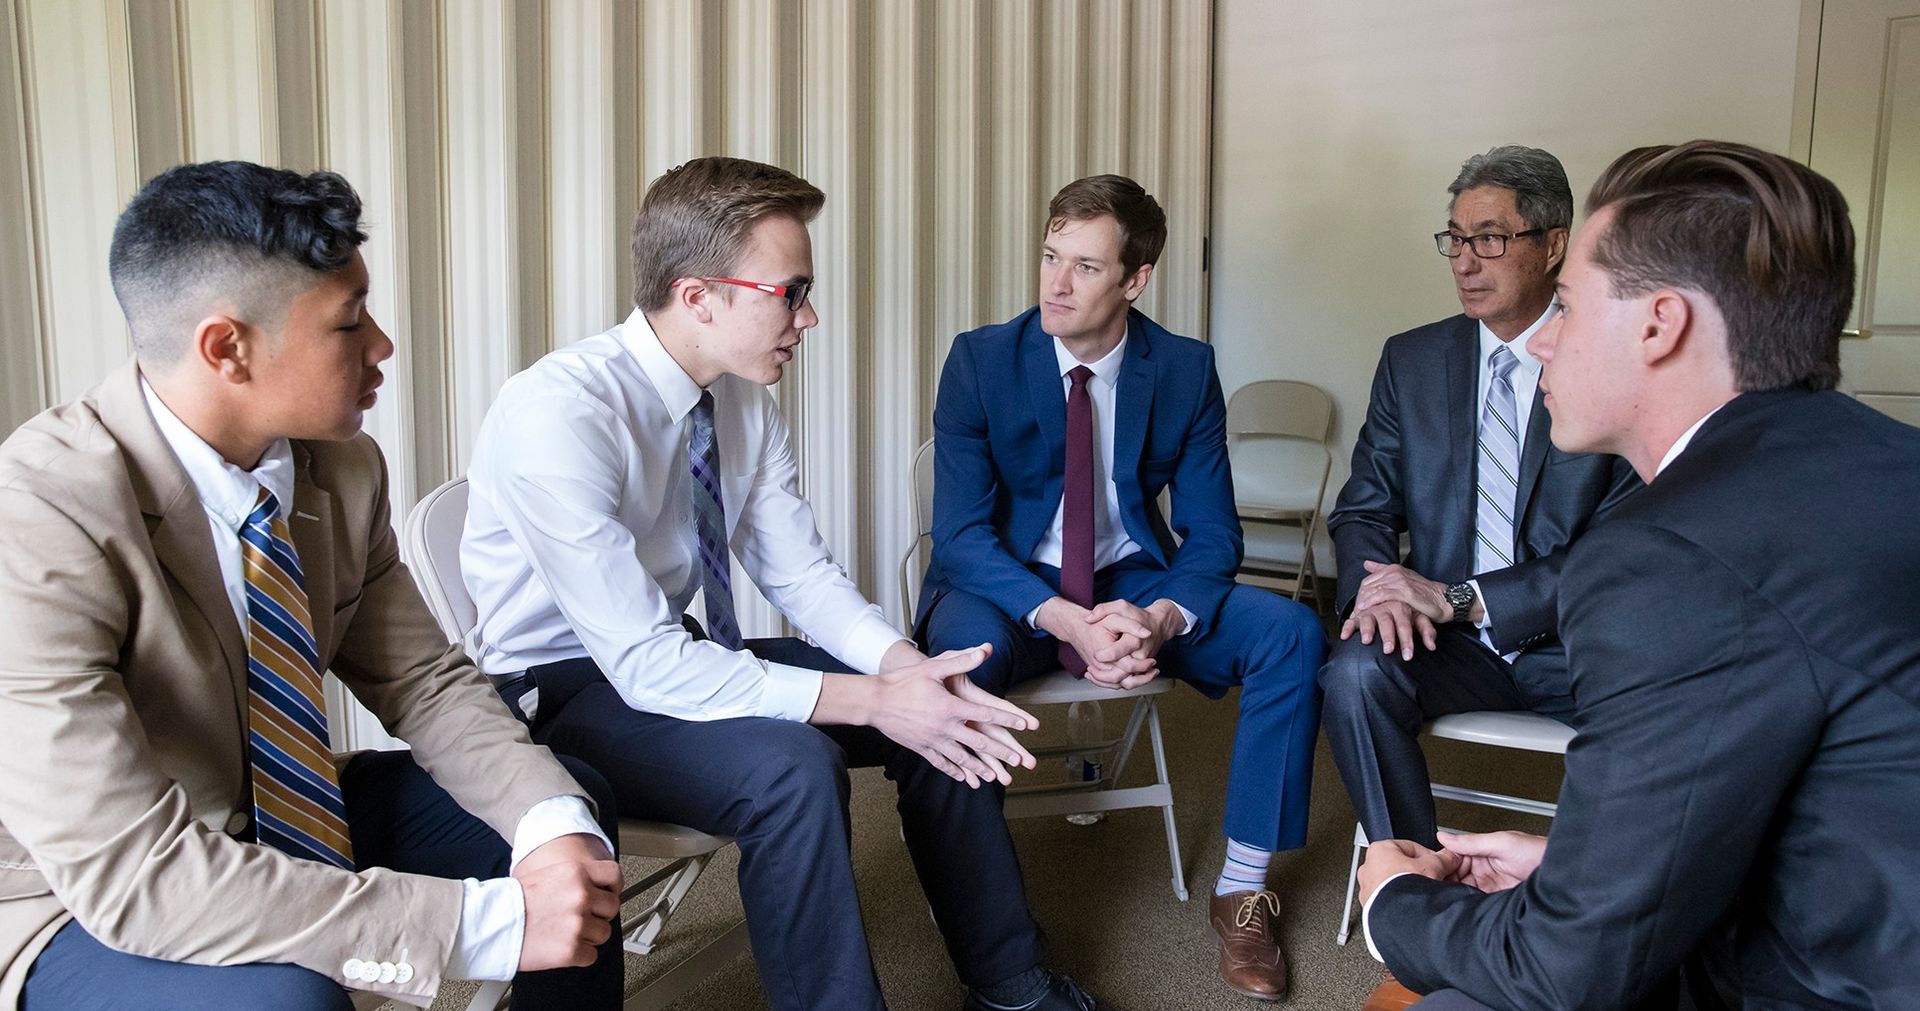 Three men are together in a church building. They appear to be in a classroom of an LDS Meetinghouse. Two of the men appear to be leaders and the other a youth. They are talking with one another, having a meeting.